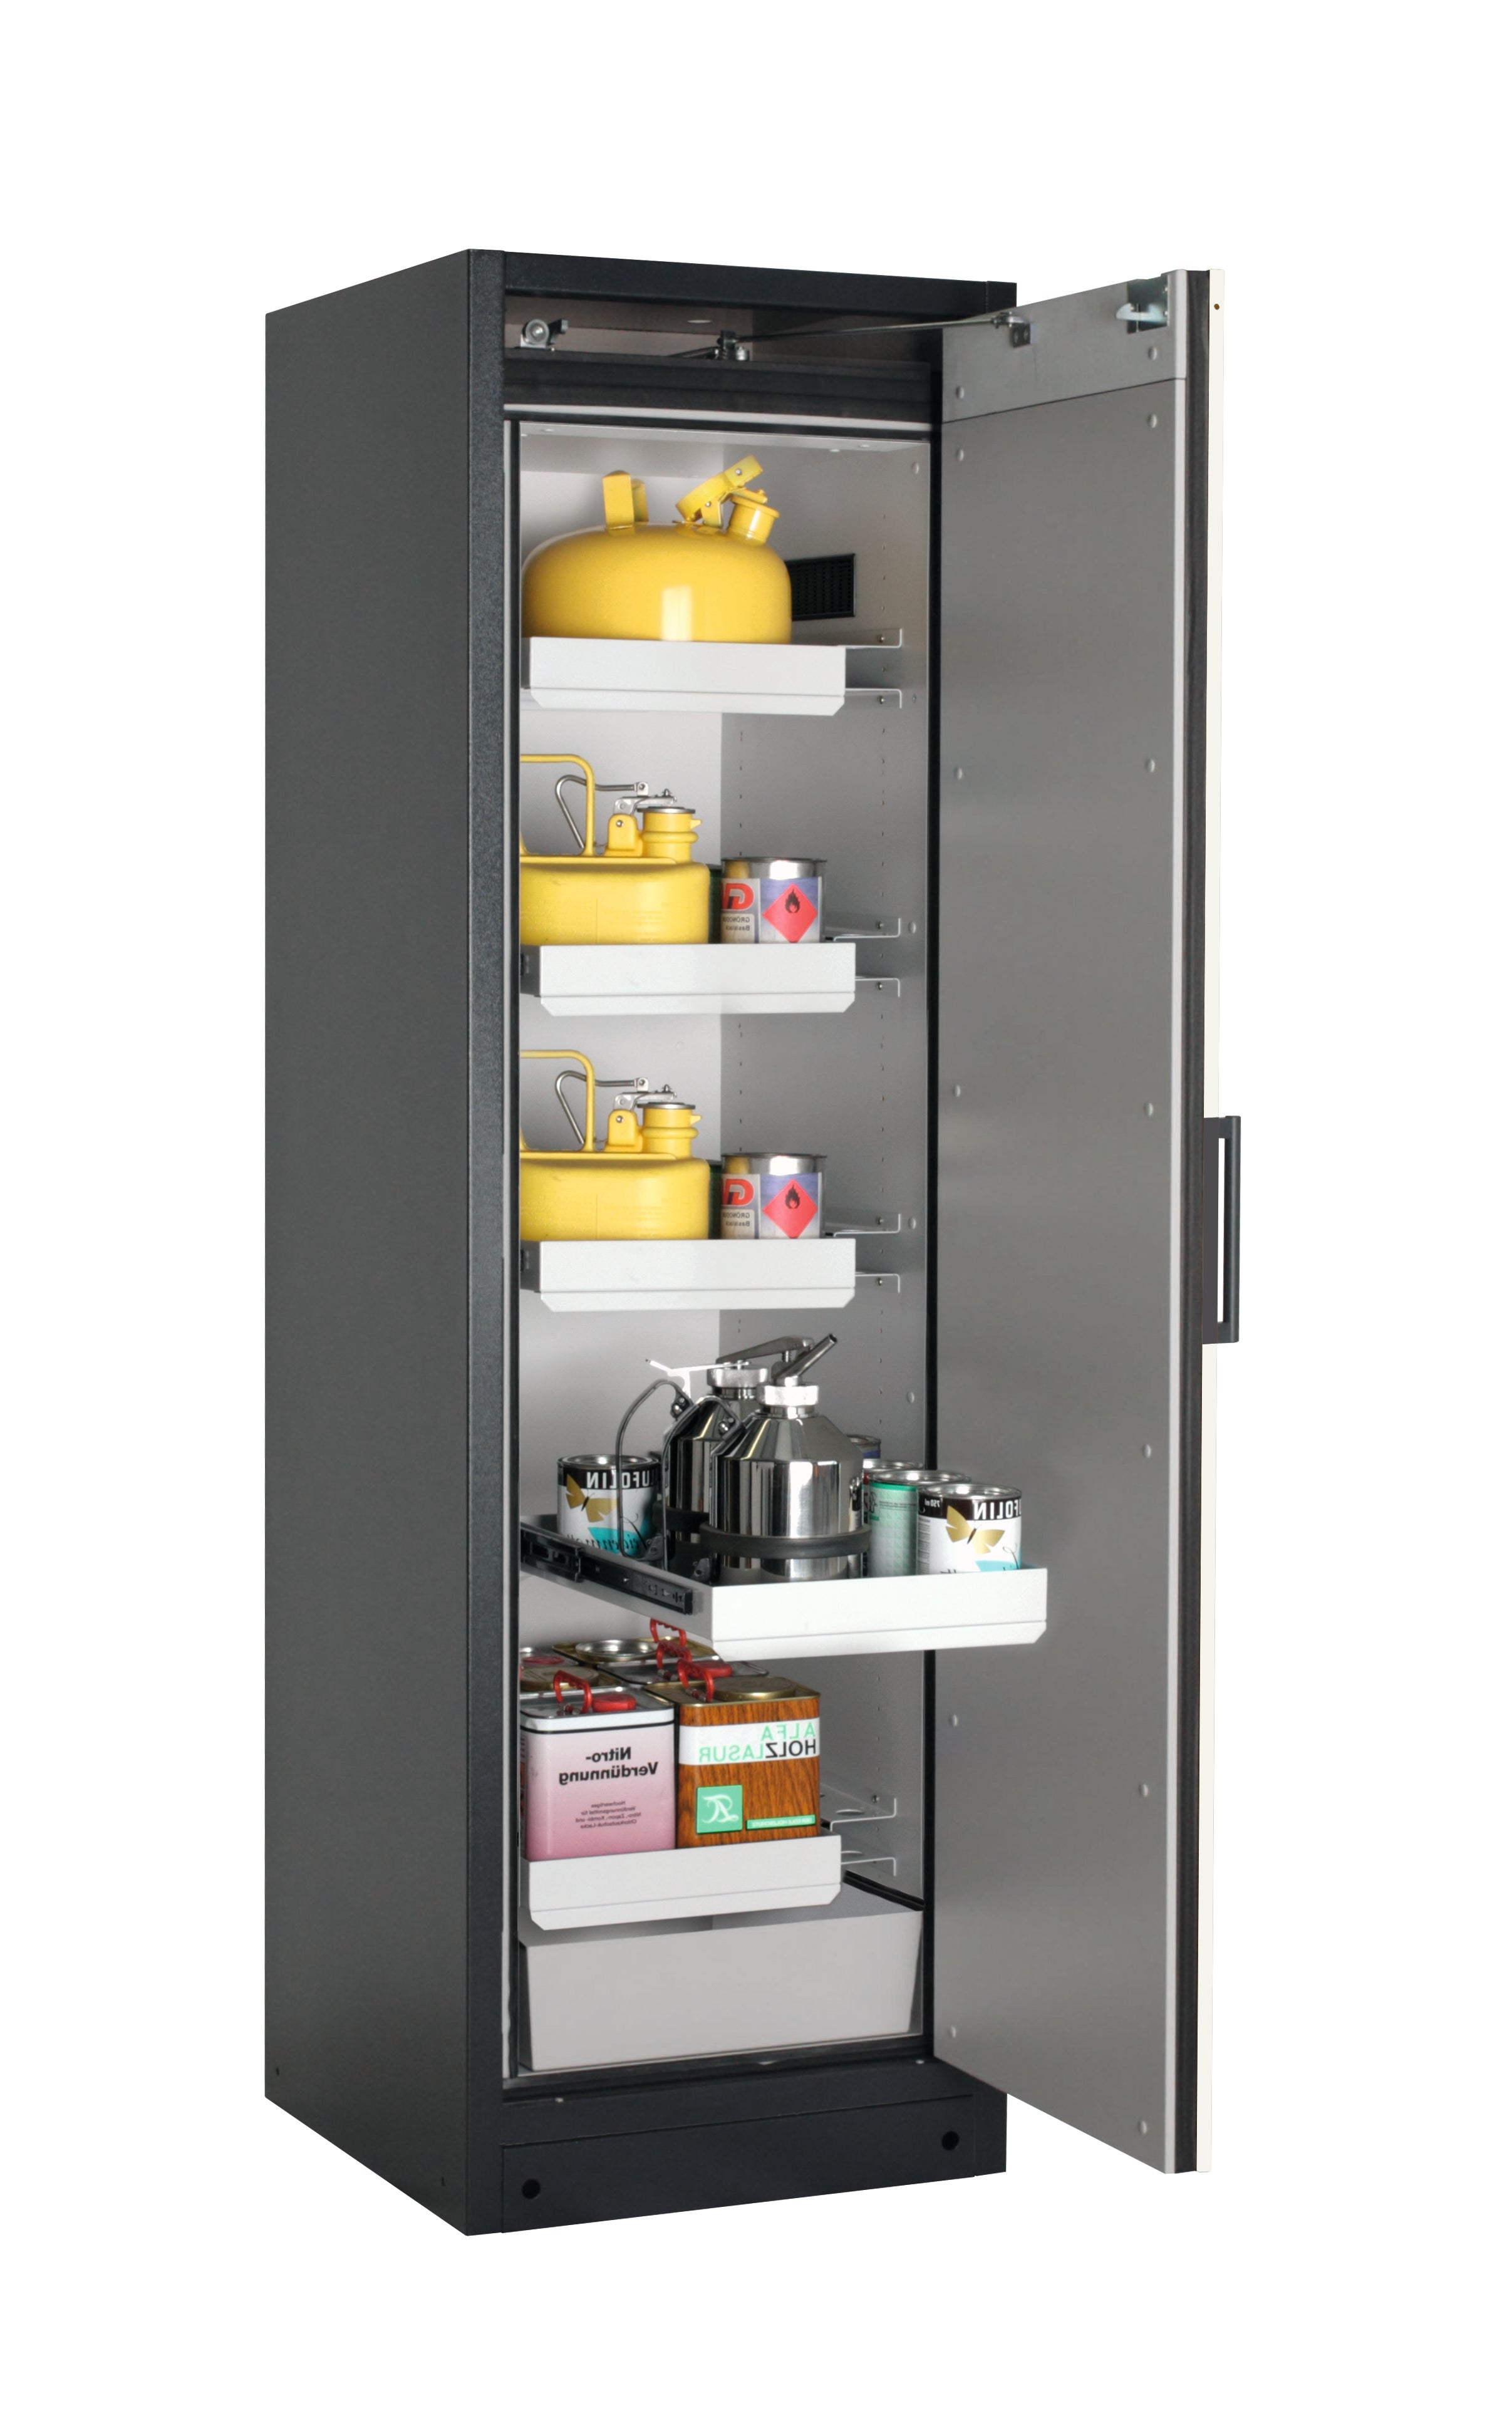 Type 90 safety storage cabinet Q-CLASSIC-90 model Q90.195.060.R in asecos silver with 4x drawer (standard) (sheet steel),